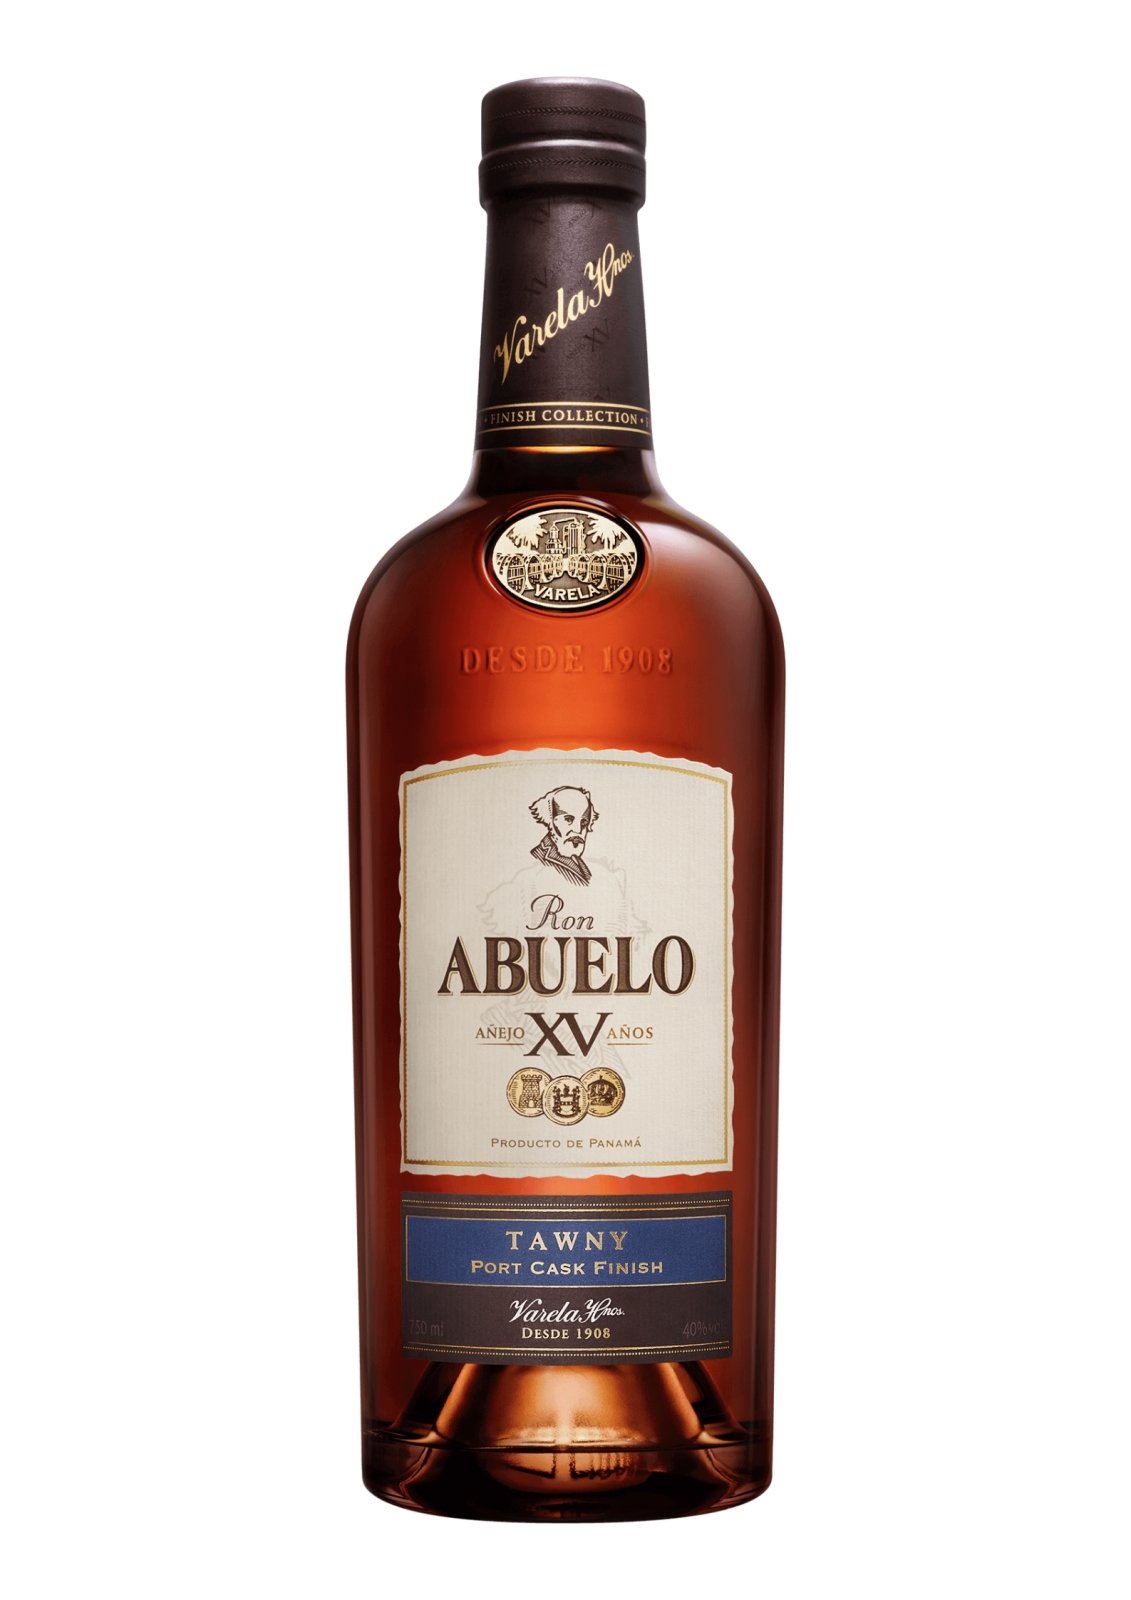 Bottle of Ron Abuelo 15-Year-Old Tawny Port Cask Finish, 40%